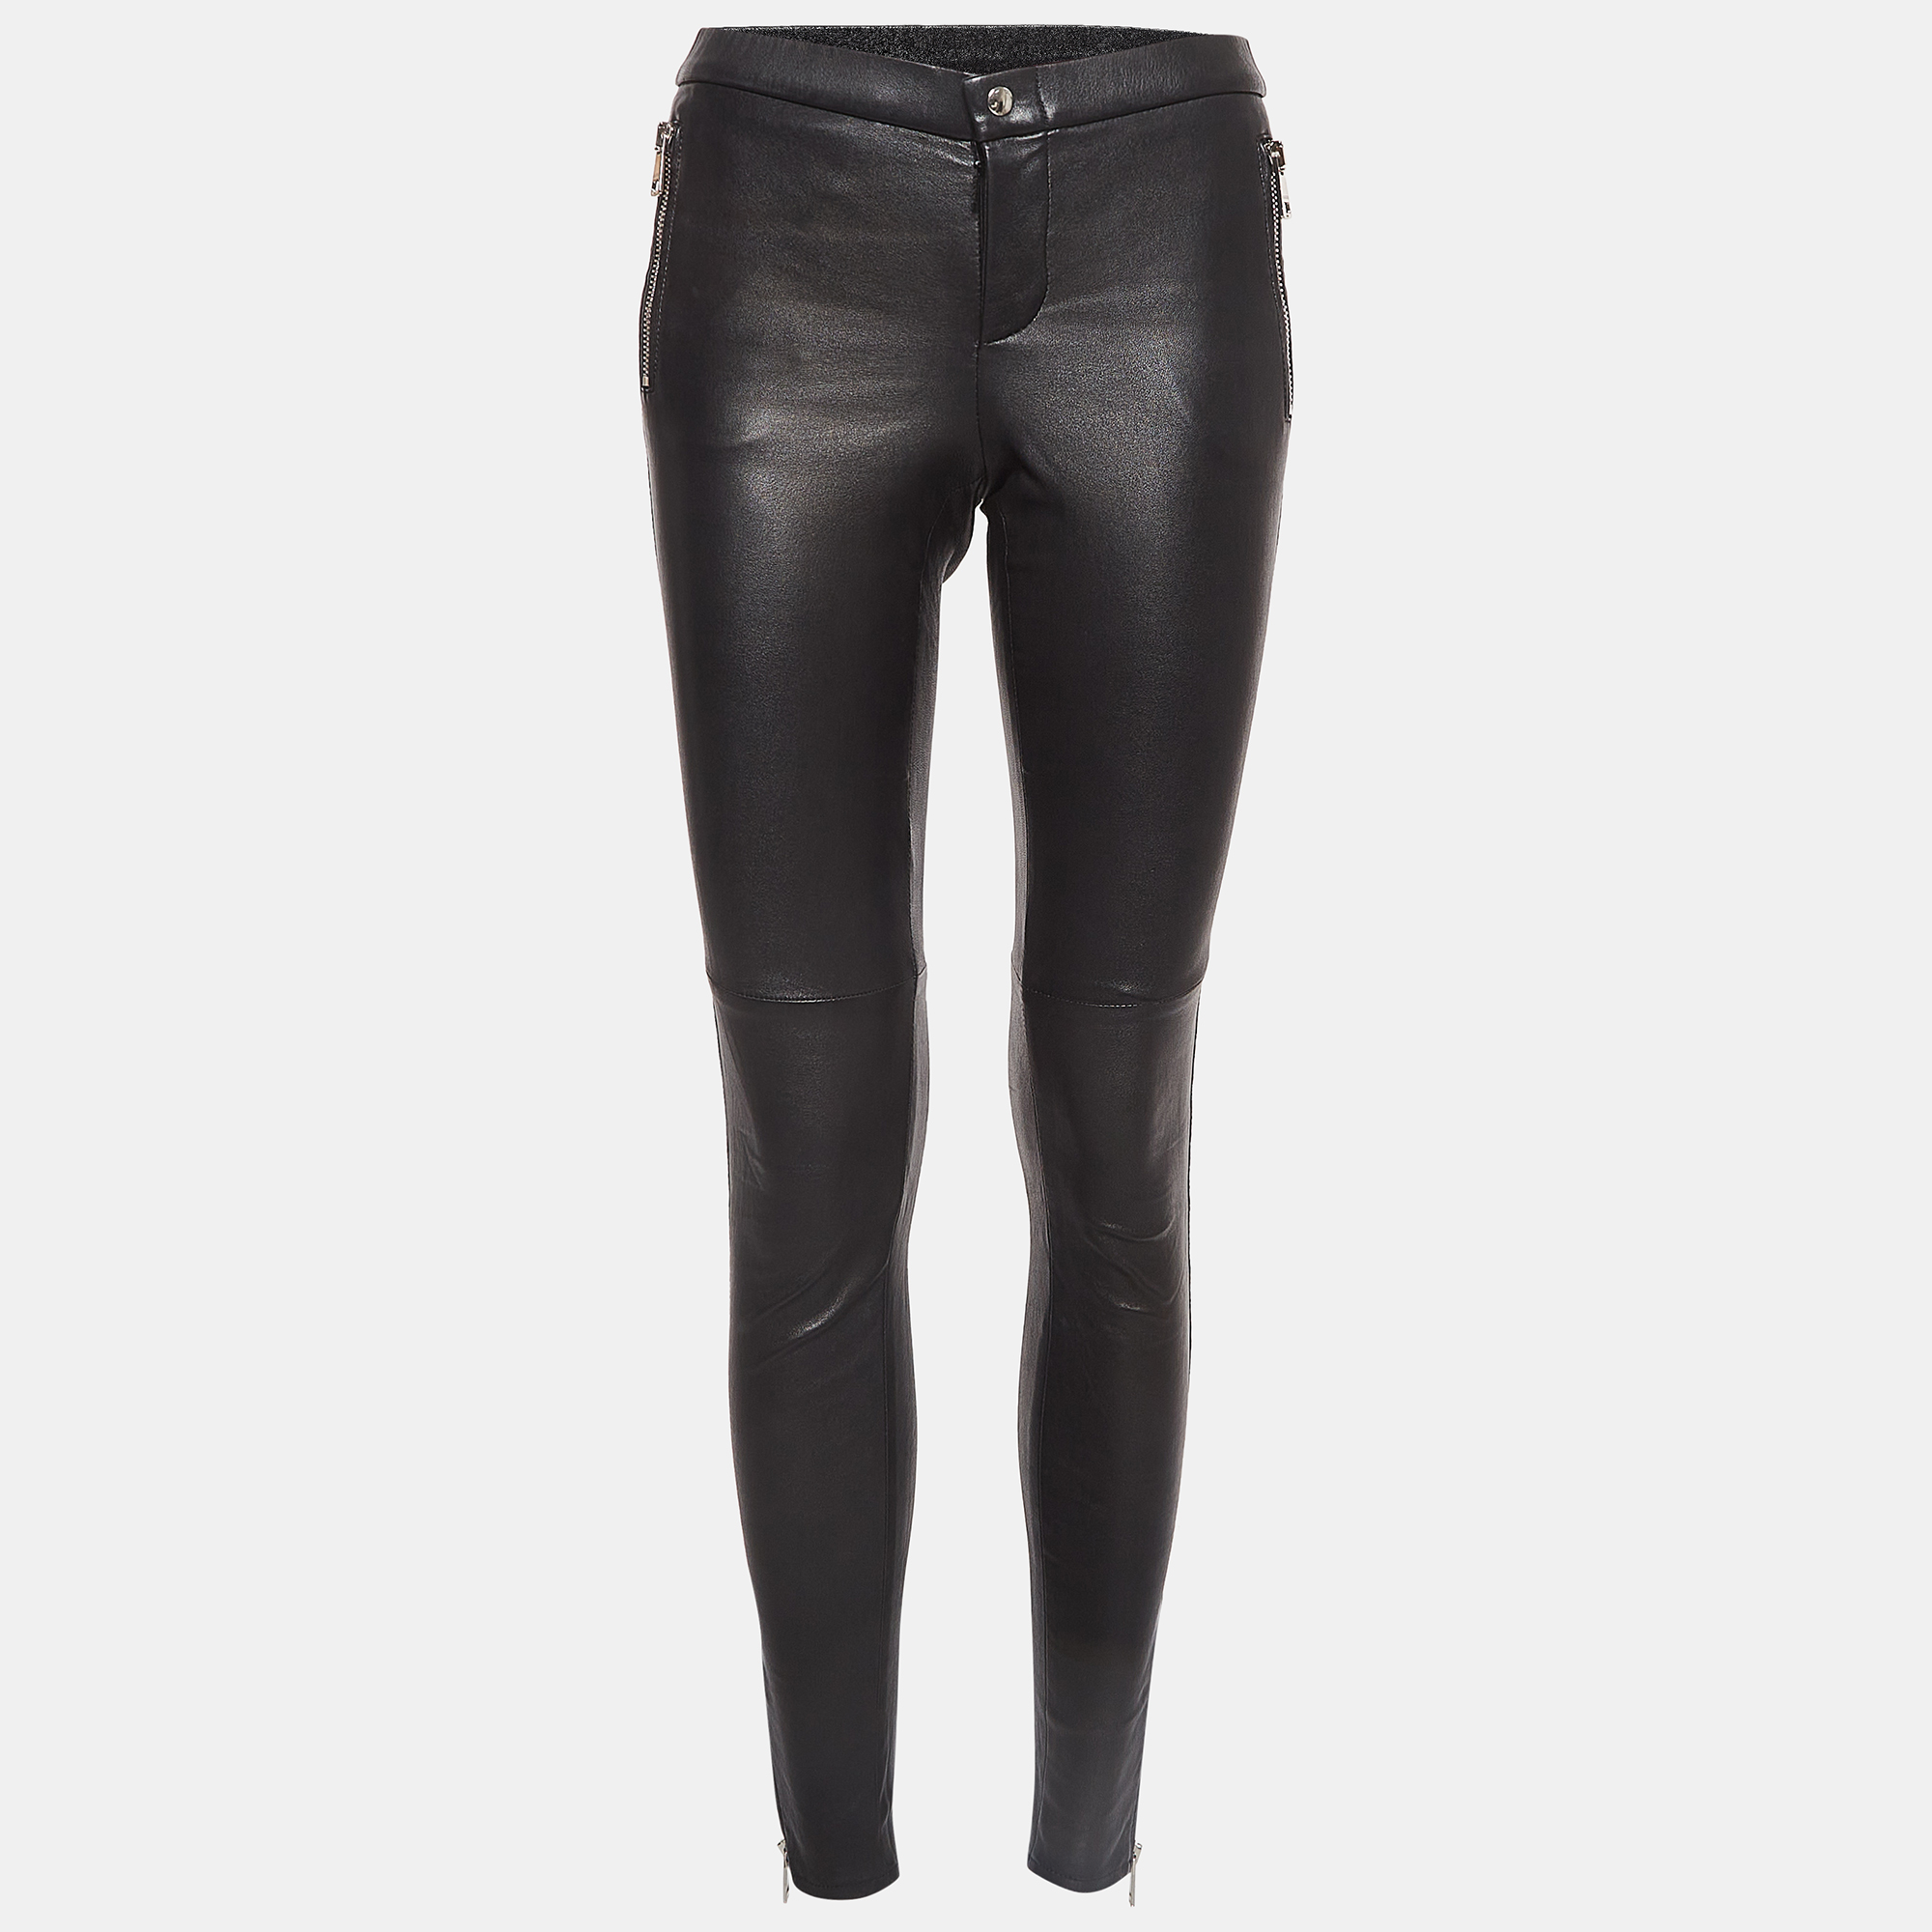 Gucci black leather skinny trousers s